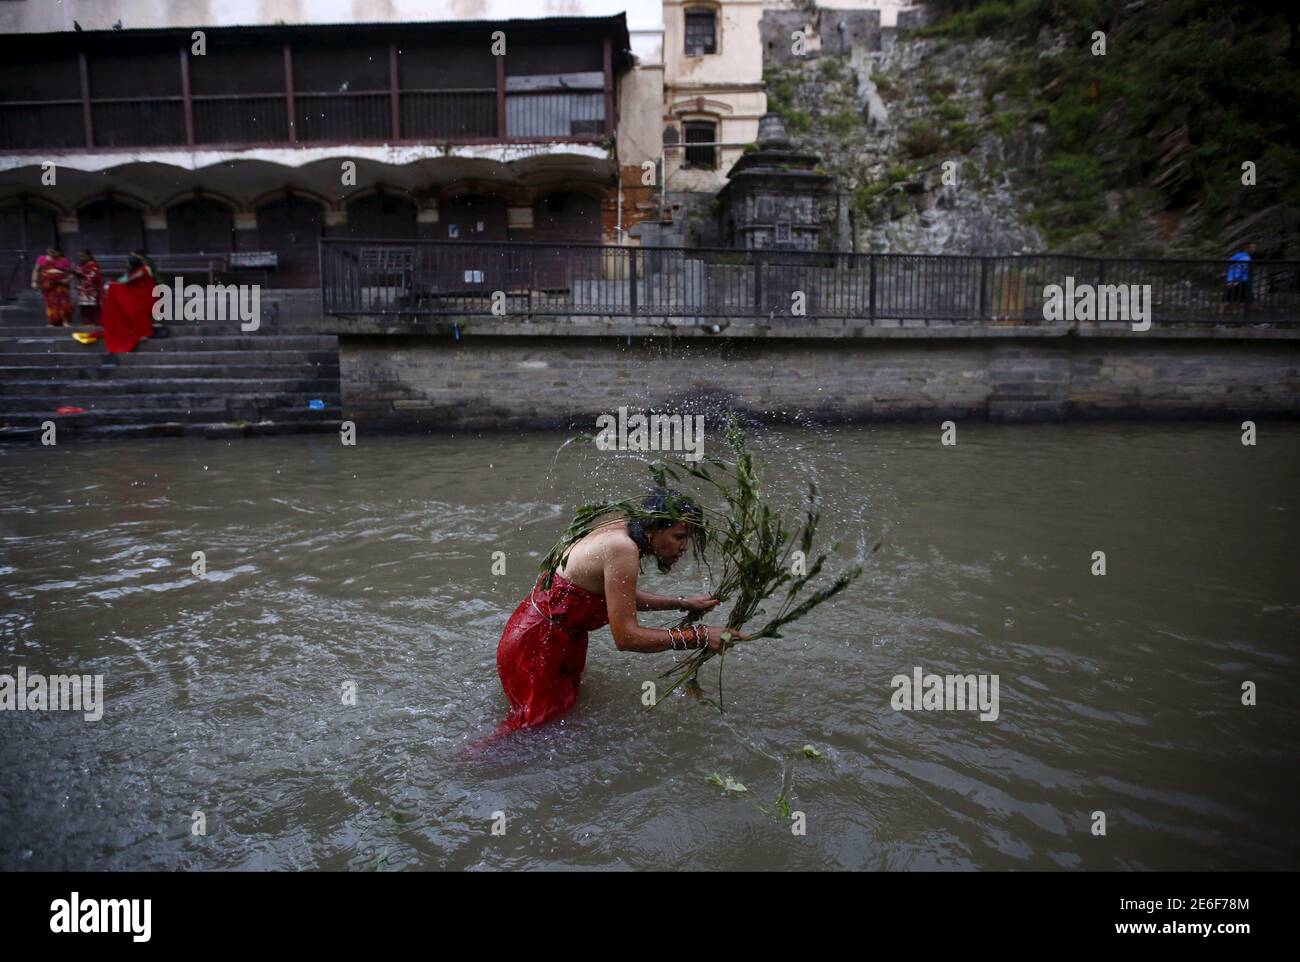 A woman lashes herself with the leaves of the Aghada plant at the Bagmati River, during the Rishi Panchami festival, in Kathmandu, Nepal September 18, 2015. Rishi Panchami is observed on the last day of Teej when women worship Sapta Rishi (Seven Saints) to ask for forgiveness for sins committed during their menstrual periods throughout the year. The Hindu religion considers menstruation as a representation of impurity and women are prohibited from taking part in religious practices during their monthly menstruations. REUTERS/Navesh Chitrakar Stock Photo